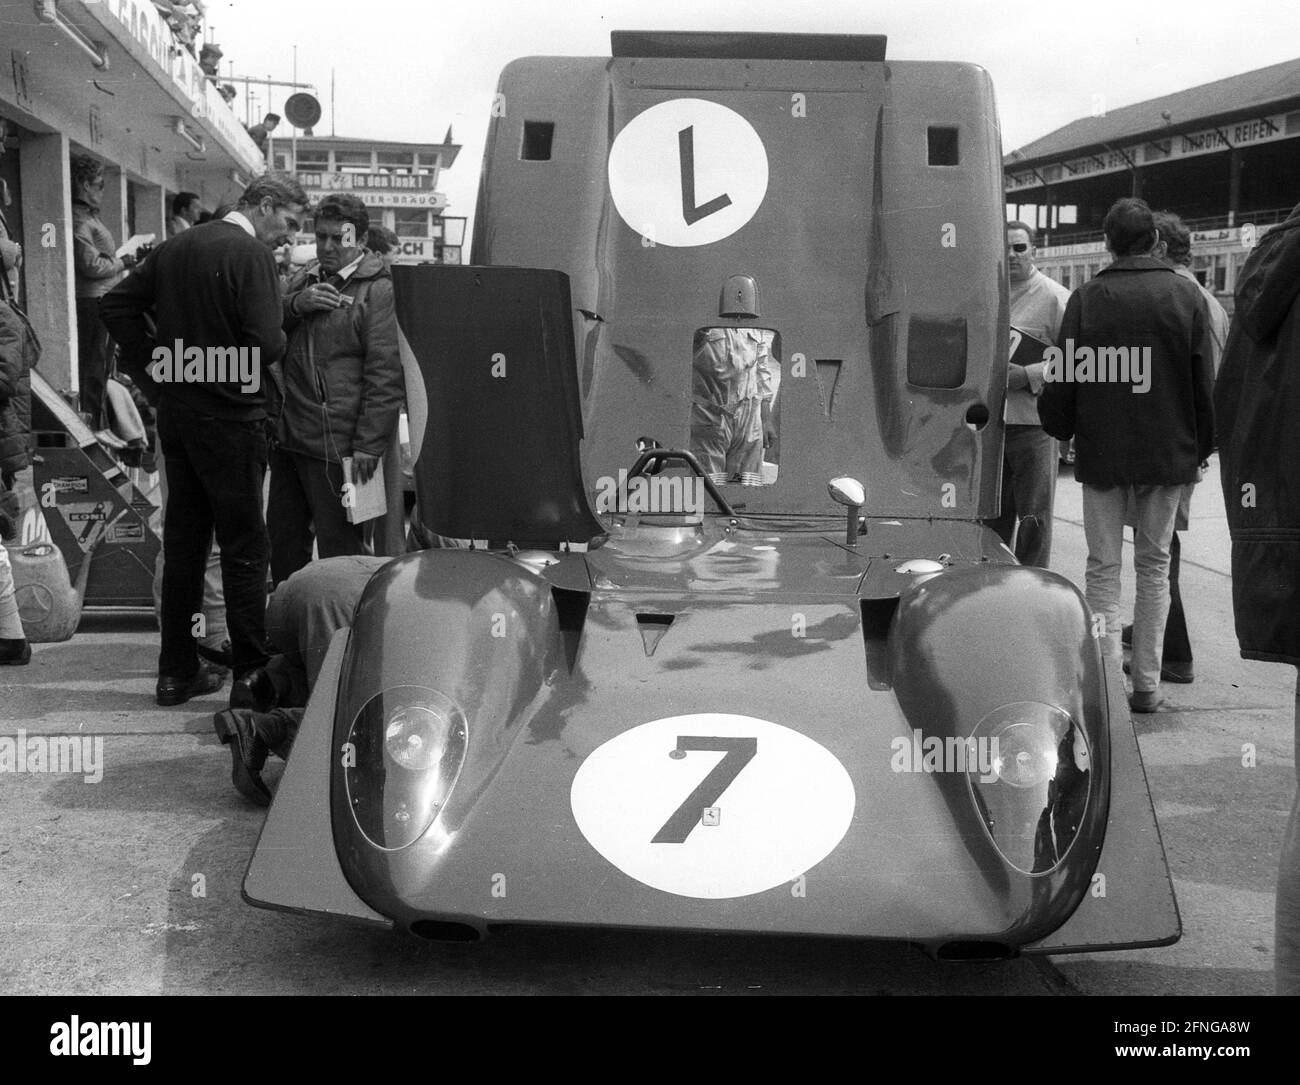 1000 km race at the Nürburgring 01.06.1969. Ferrari 312P of Pedro Rodriguez and Chris Amon at the pits [automated translation] Stock Photo